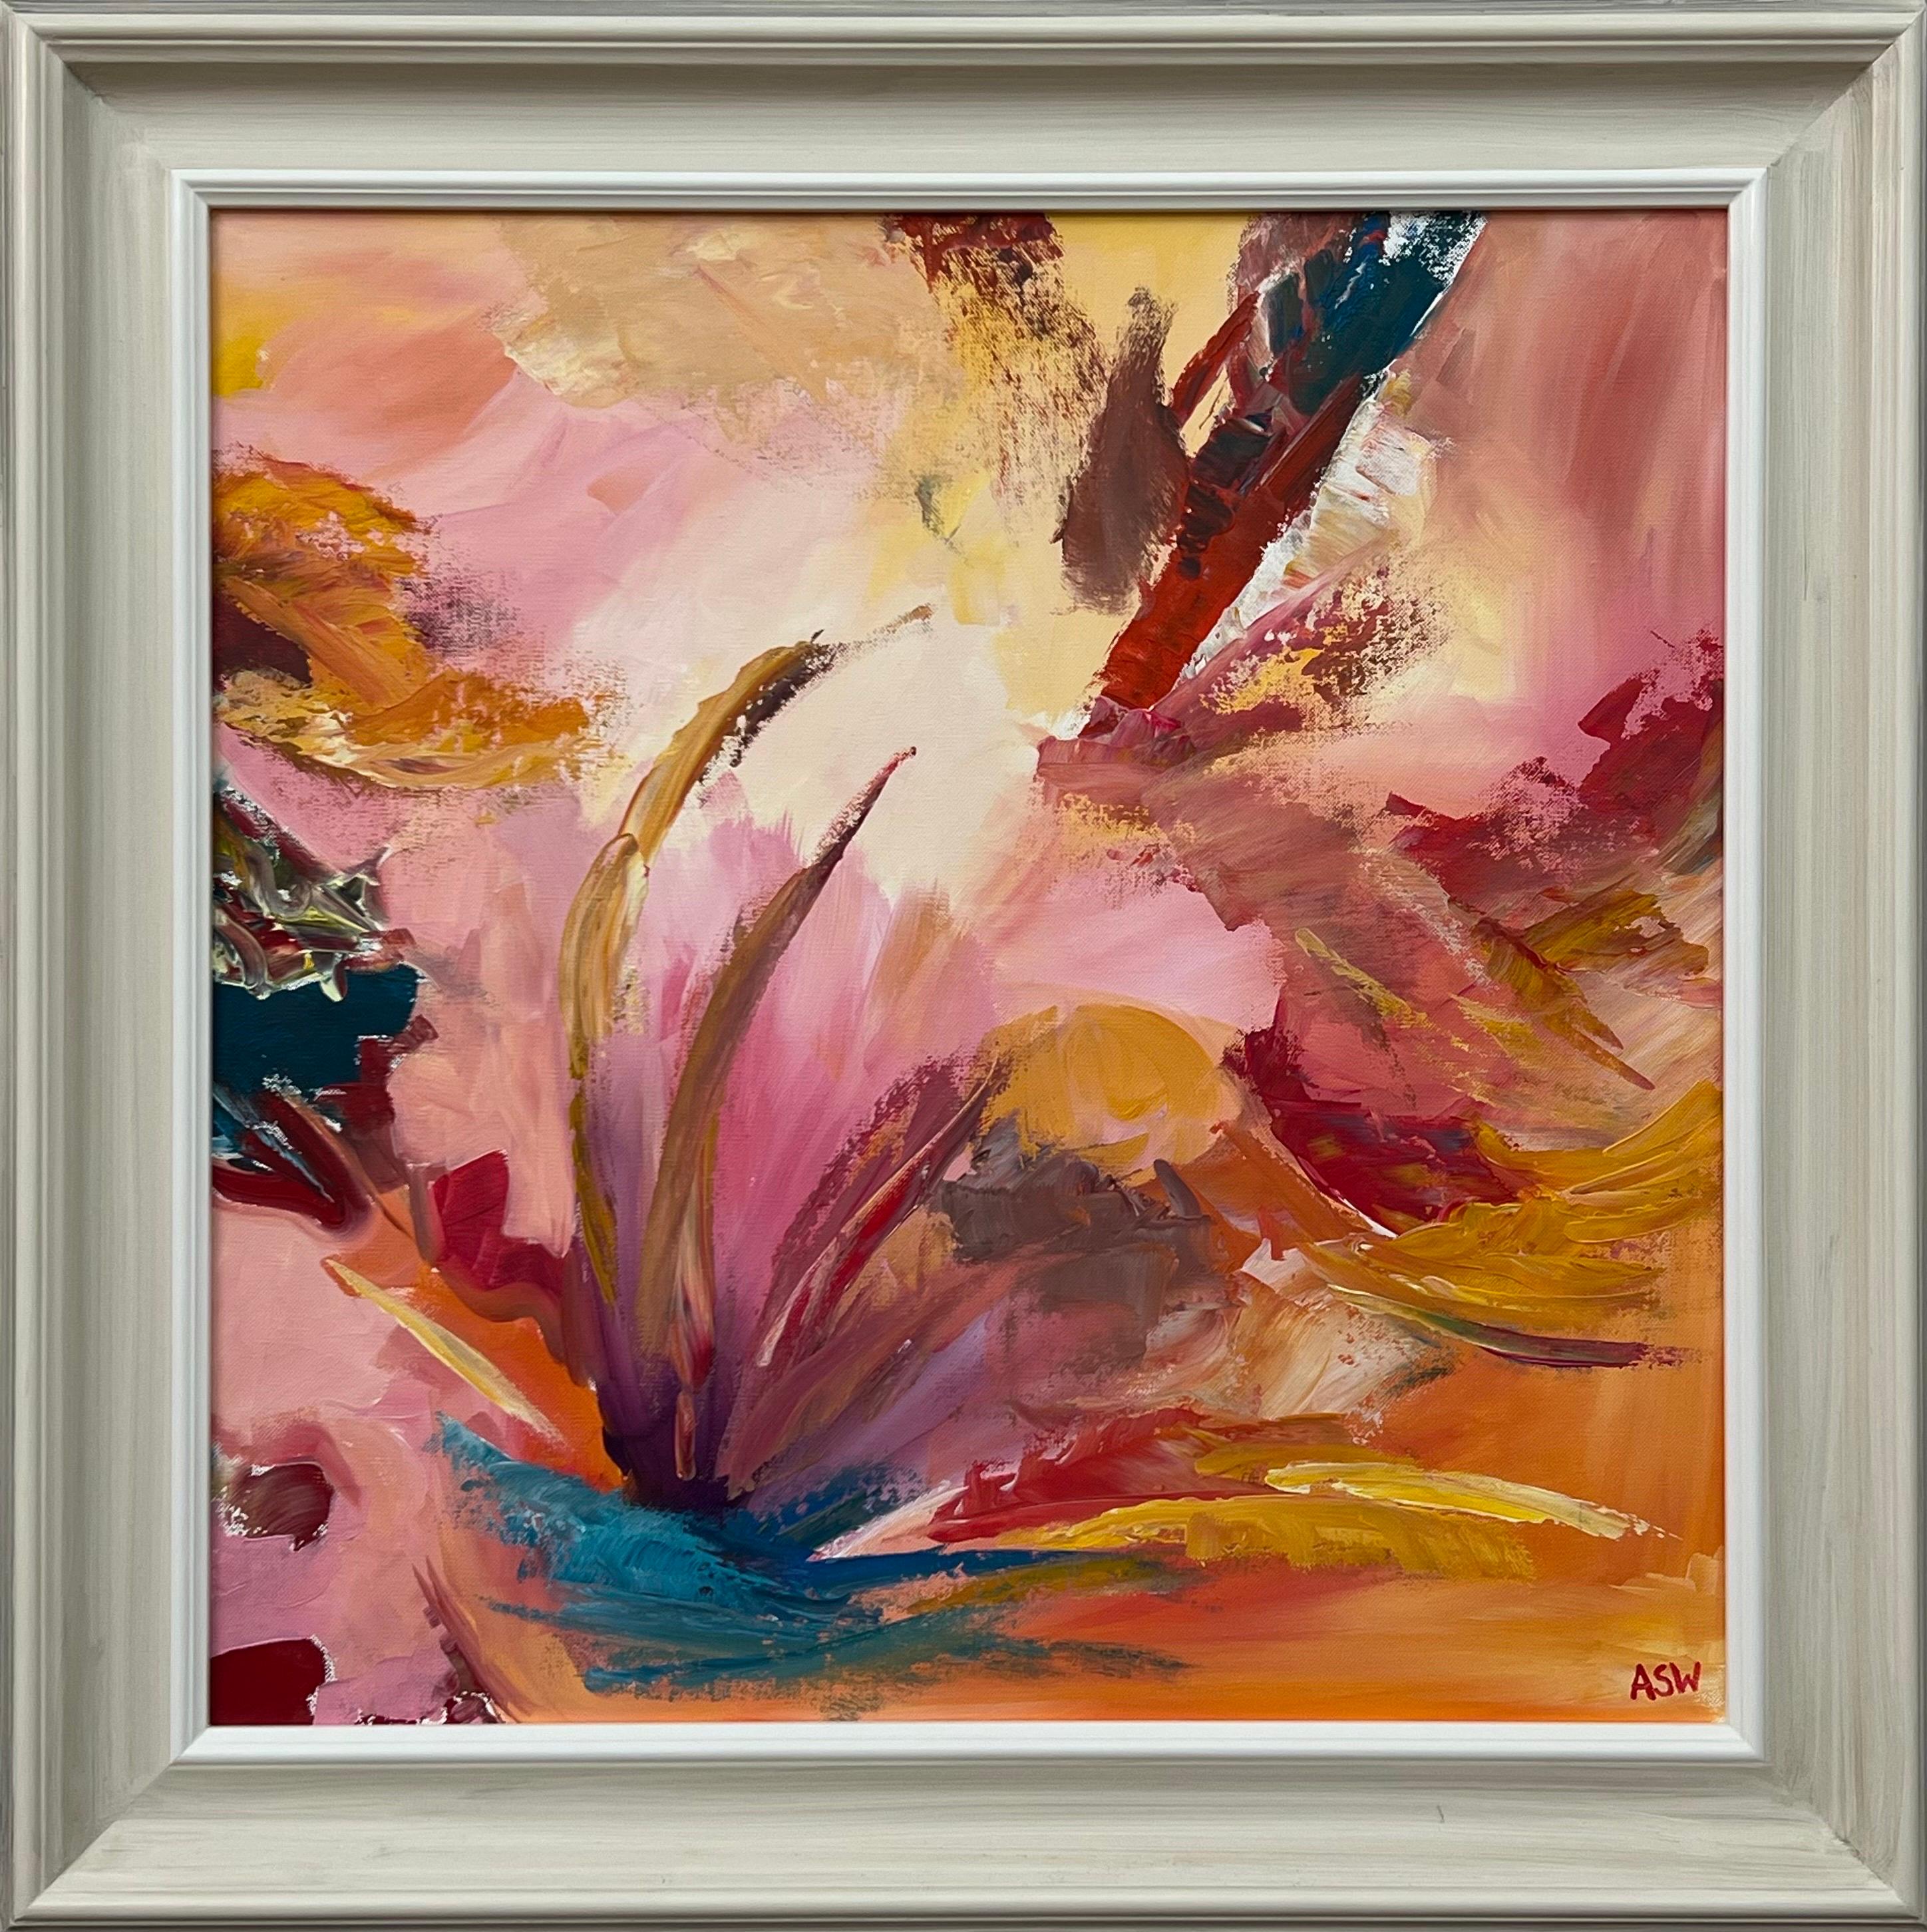 Pink Orange Red & Turquoise Expressive Abstract Canvas by Contemporary Artist